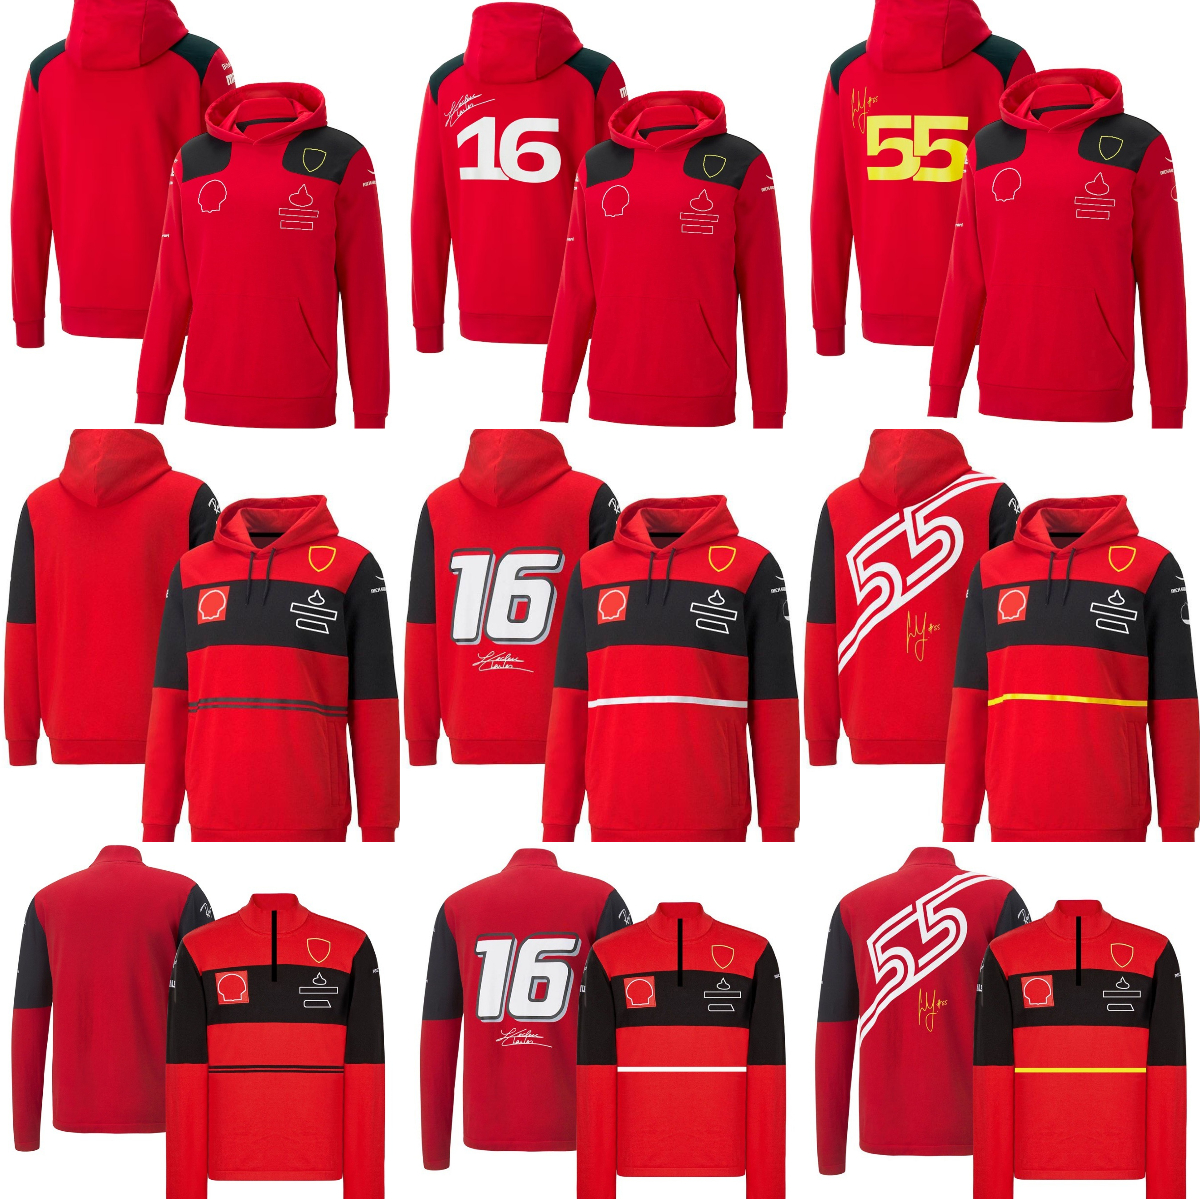 

2022-2023 New F1 Team Men's Hoodie Formula 1 Racing Hoodies Sweat Spring Autumn Driver Red Sweatshirt Outdoor Extreme Sports Clothing